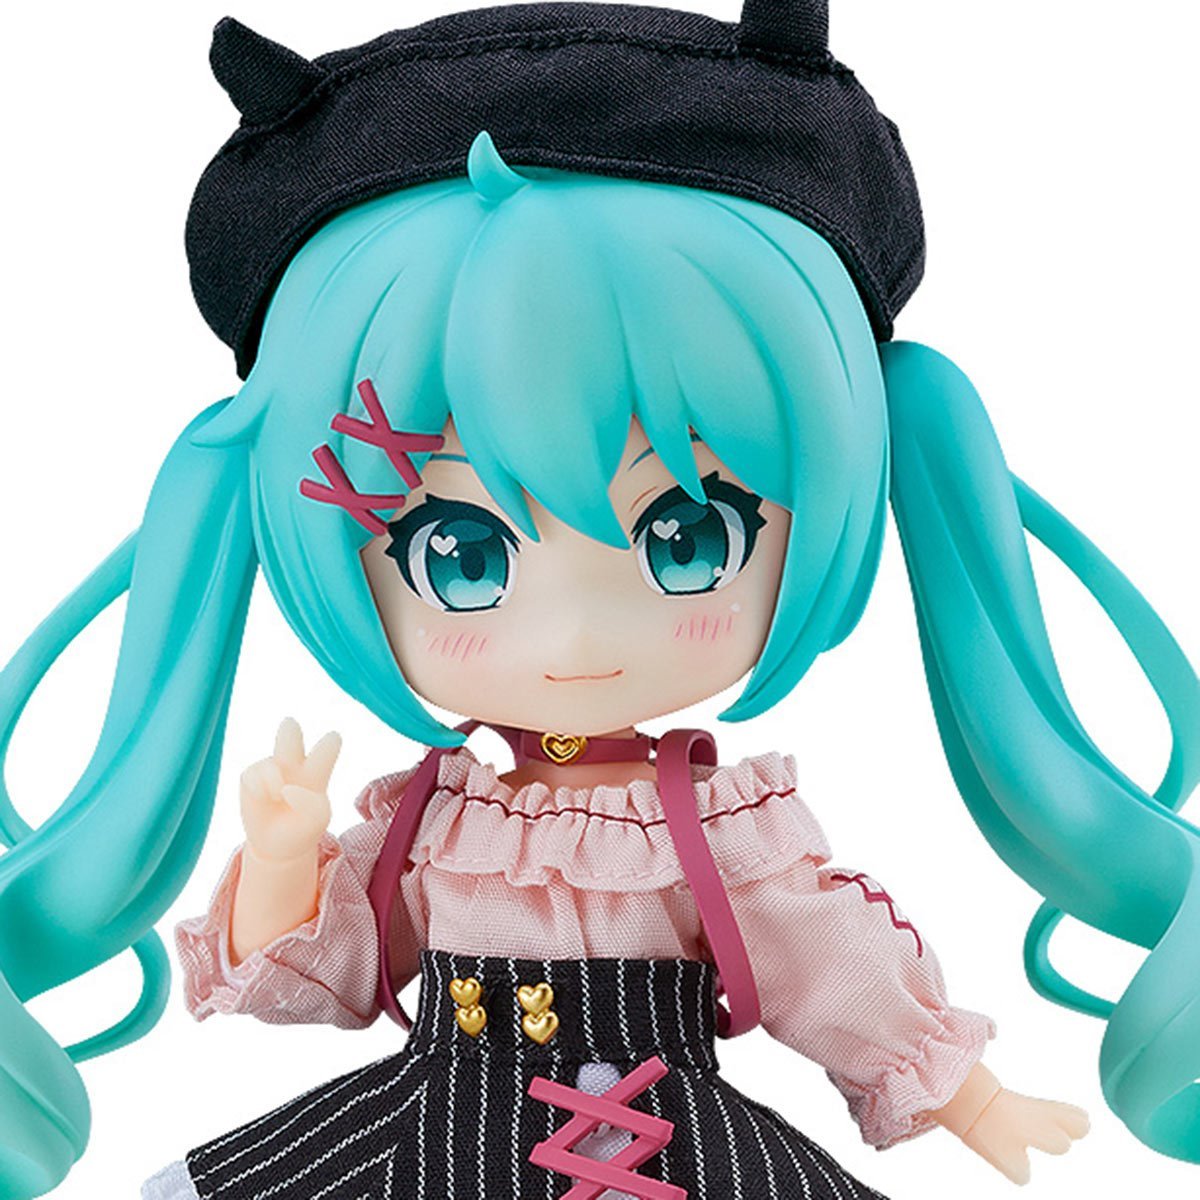 Nendoroid Outfit | tunersread.com